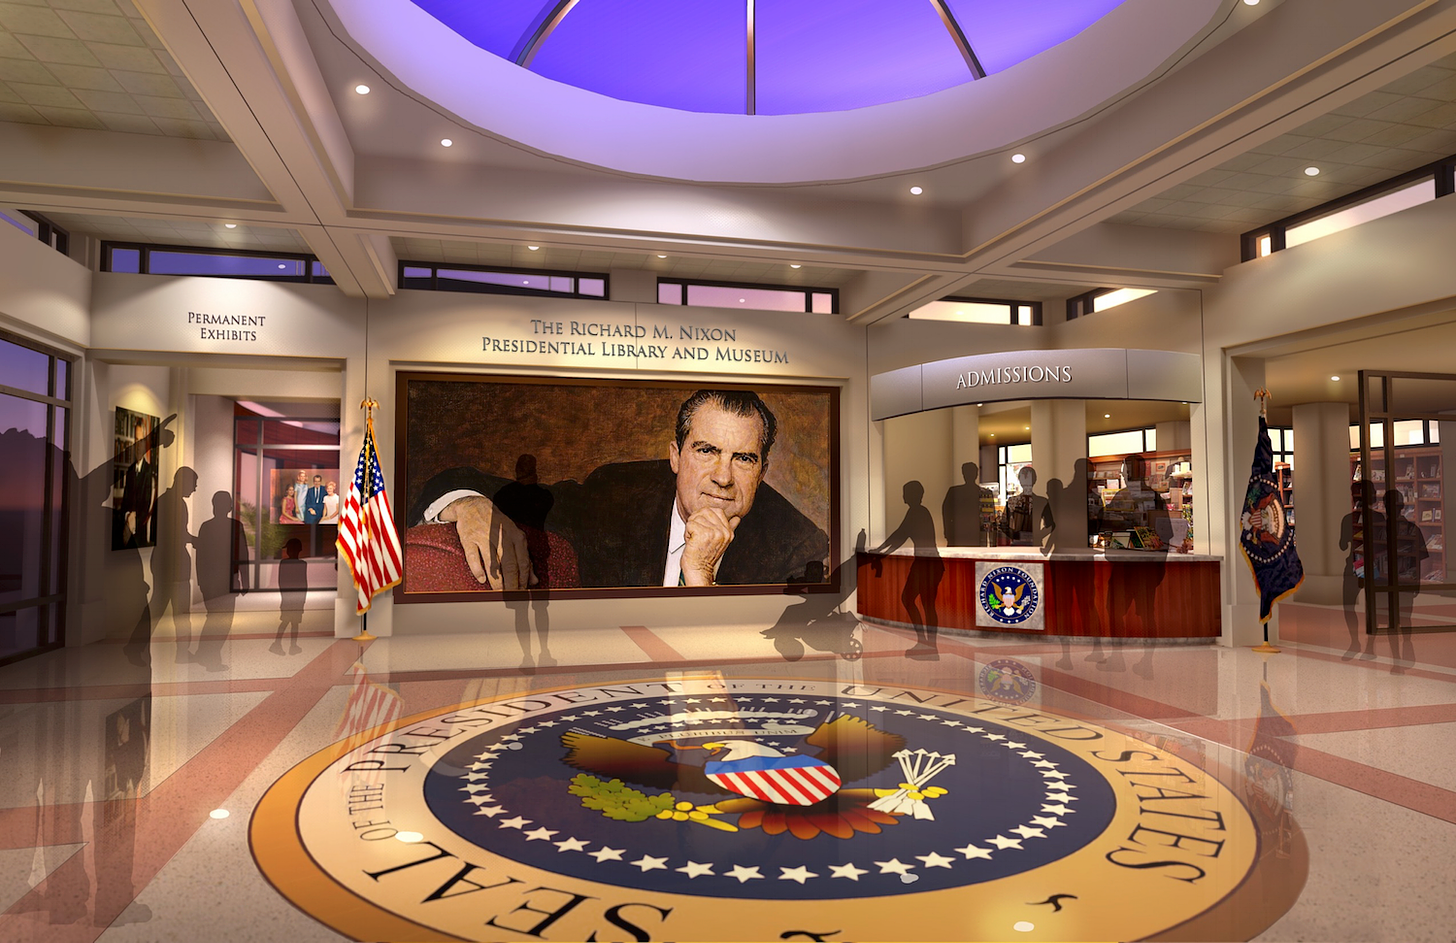 Opening Ceremonies for the New Nixon Library and Museum